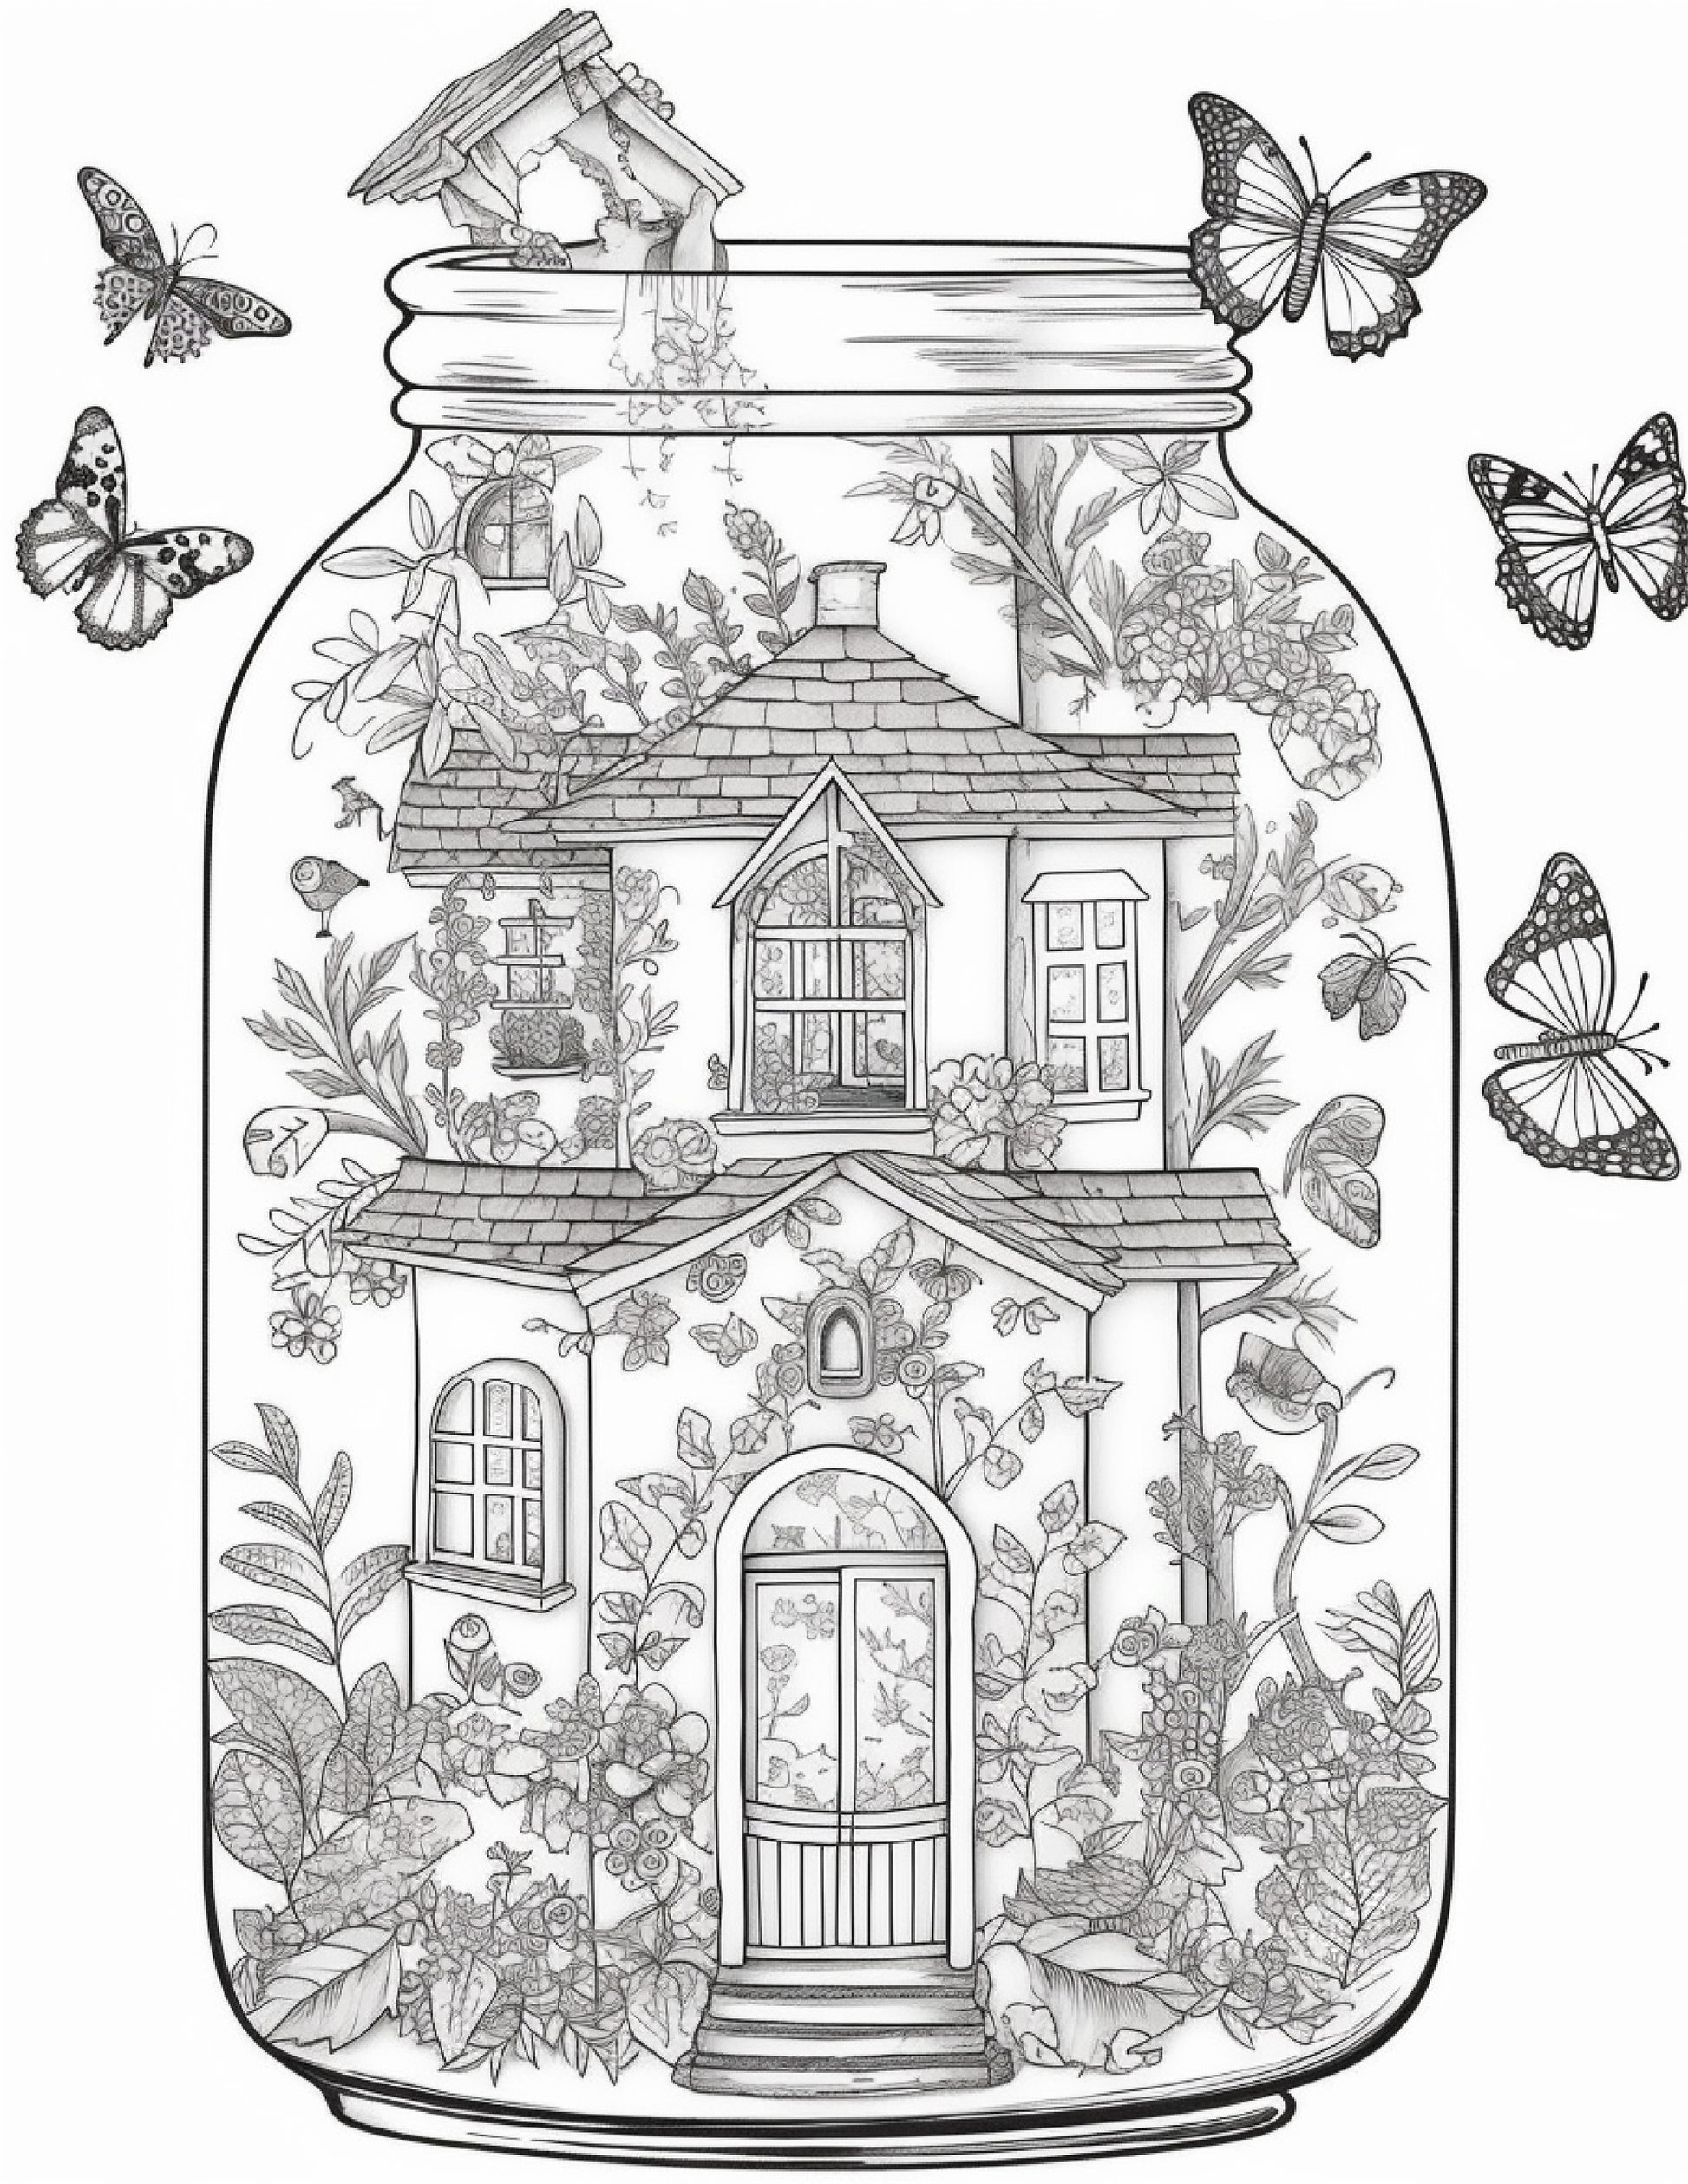 Nice Little Town 4 adult Coloring Book, Digital, Coloring Pages PDF,  Coloring Pages Printable, for Stress Relieving, for Relaxation 